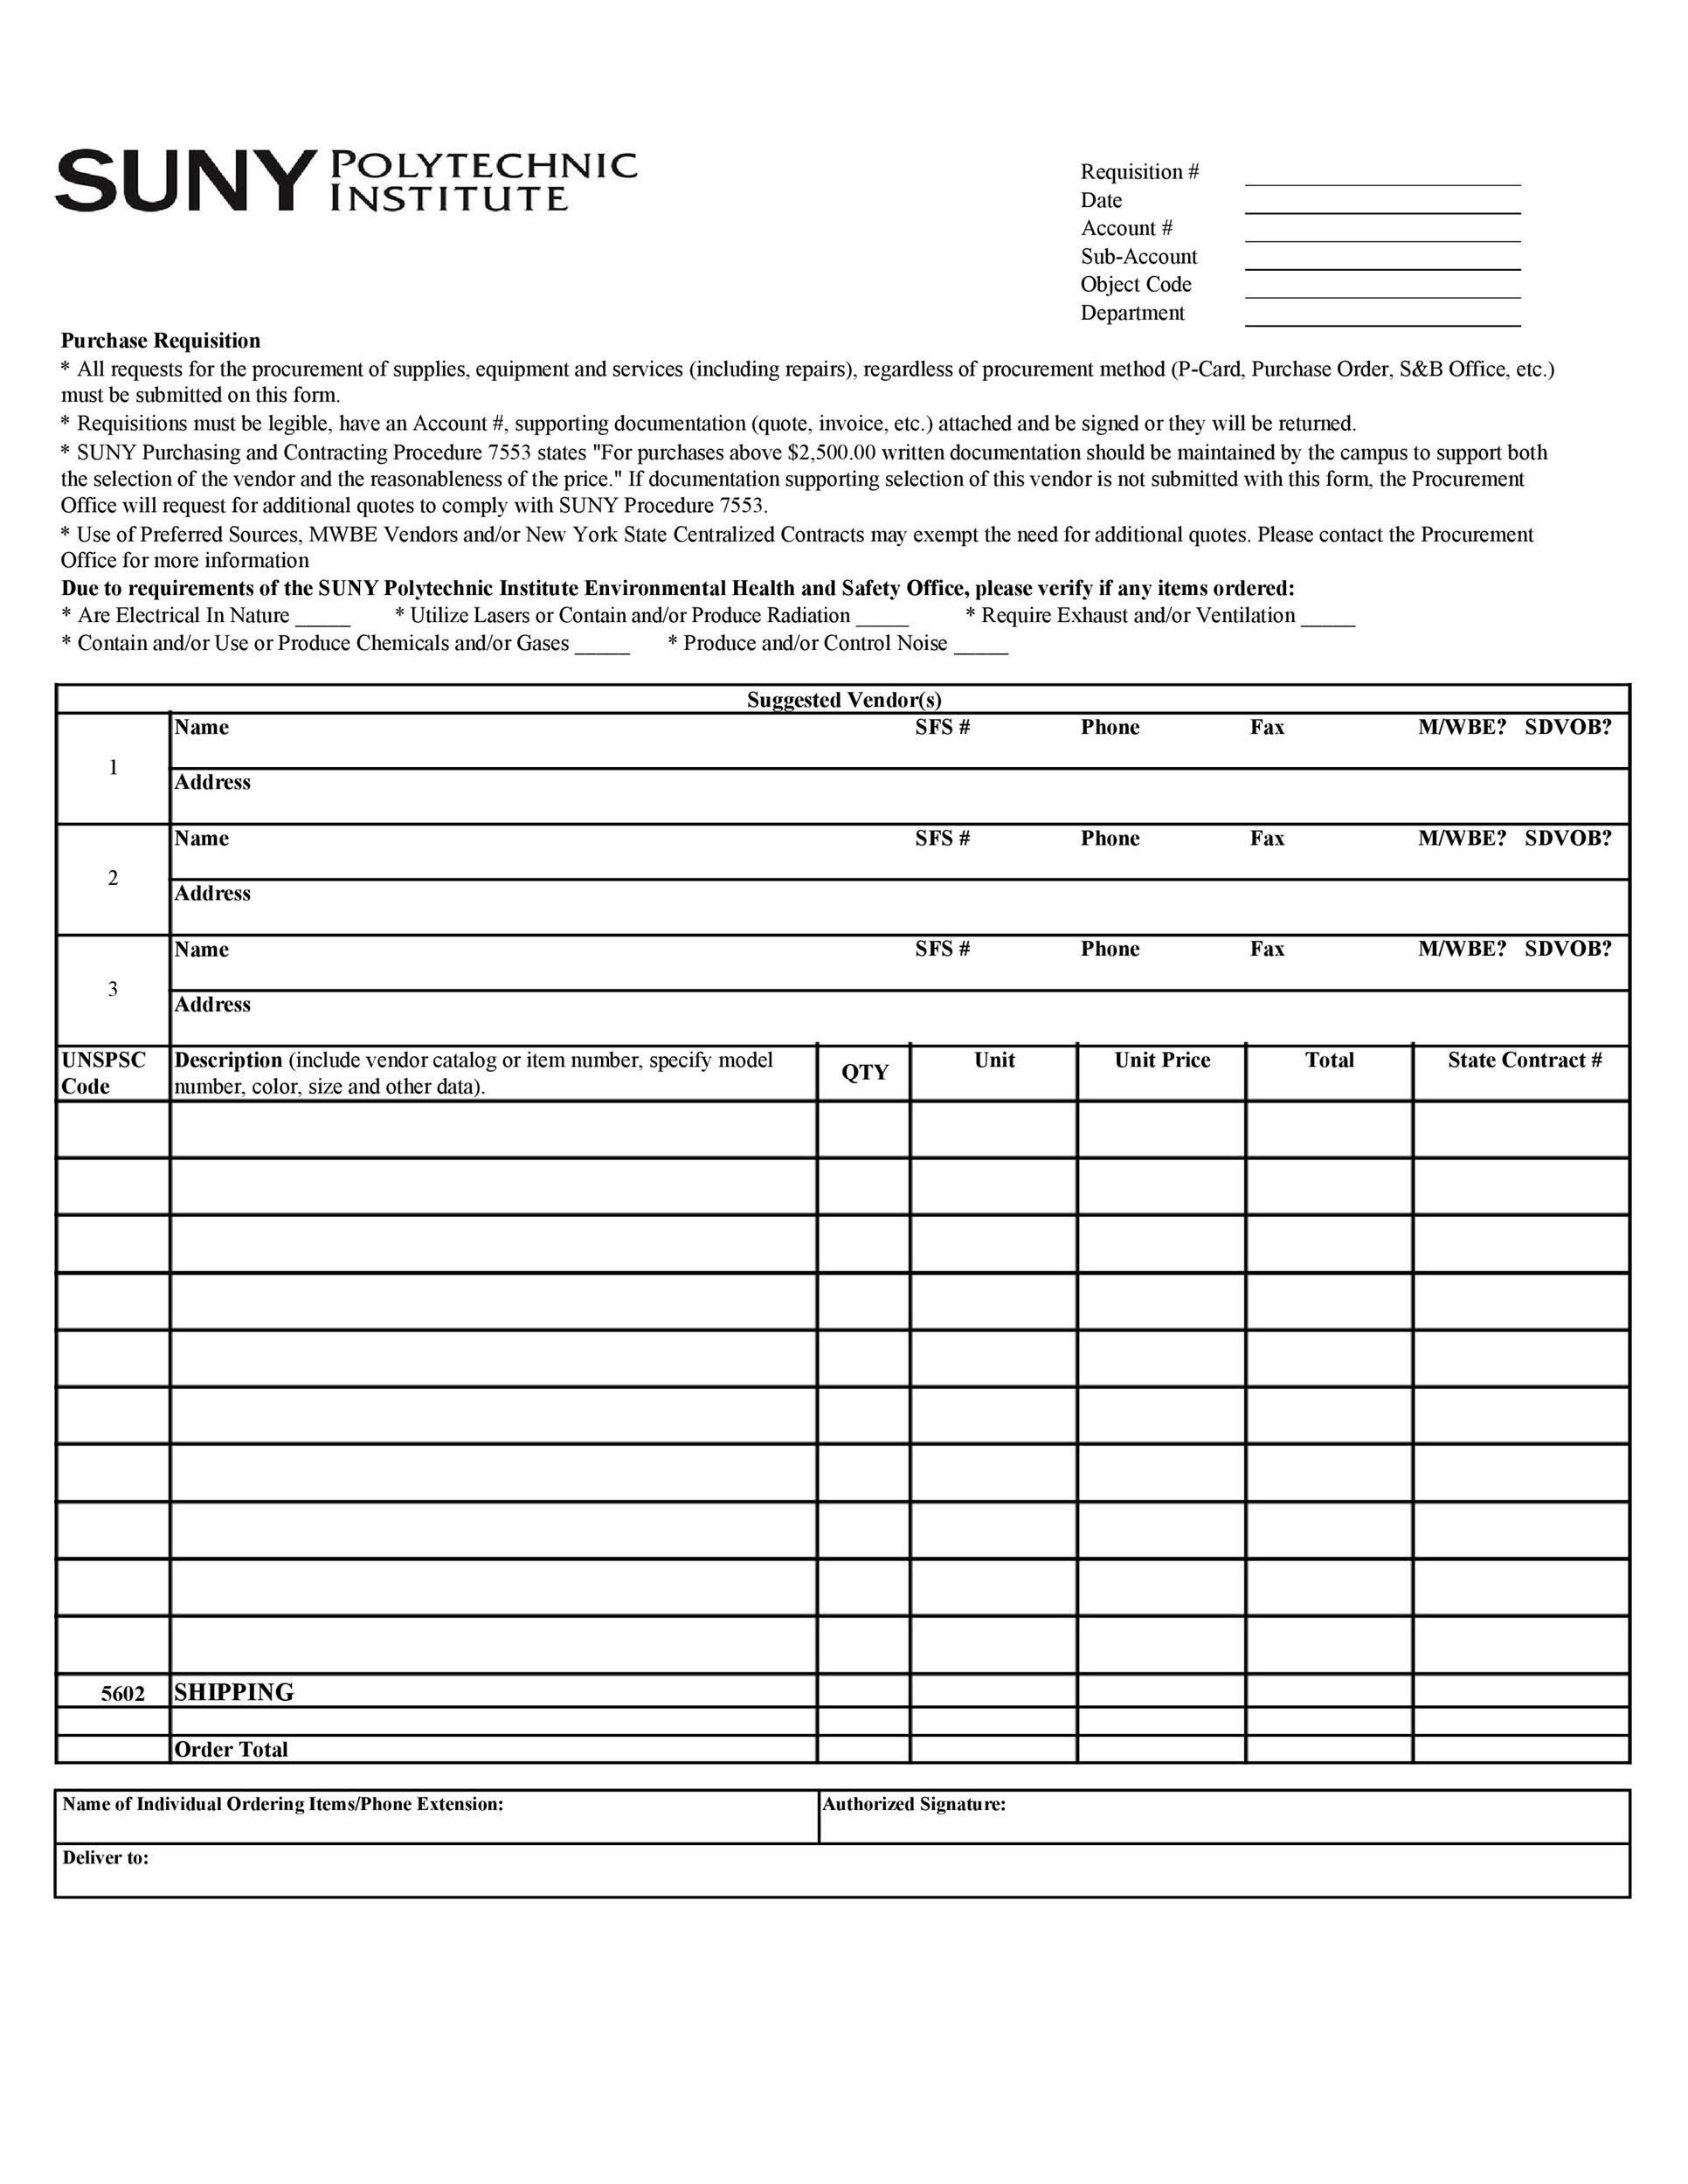 Free requisition form 30